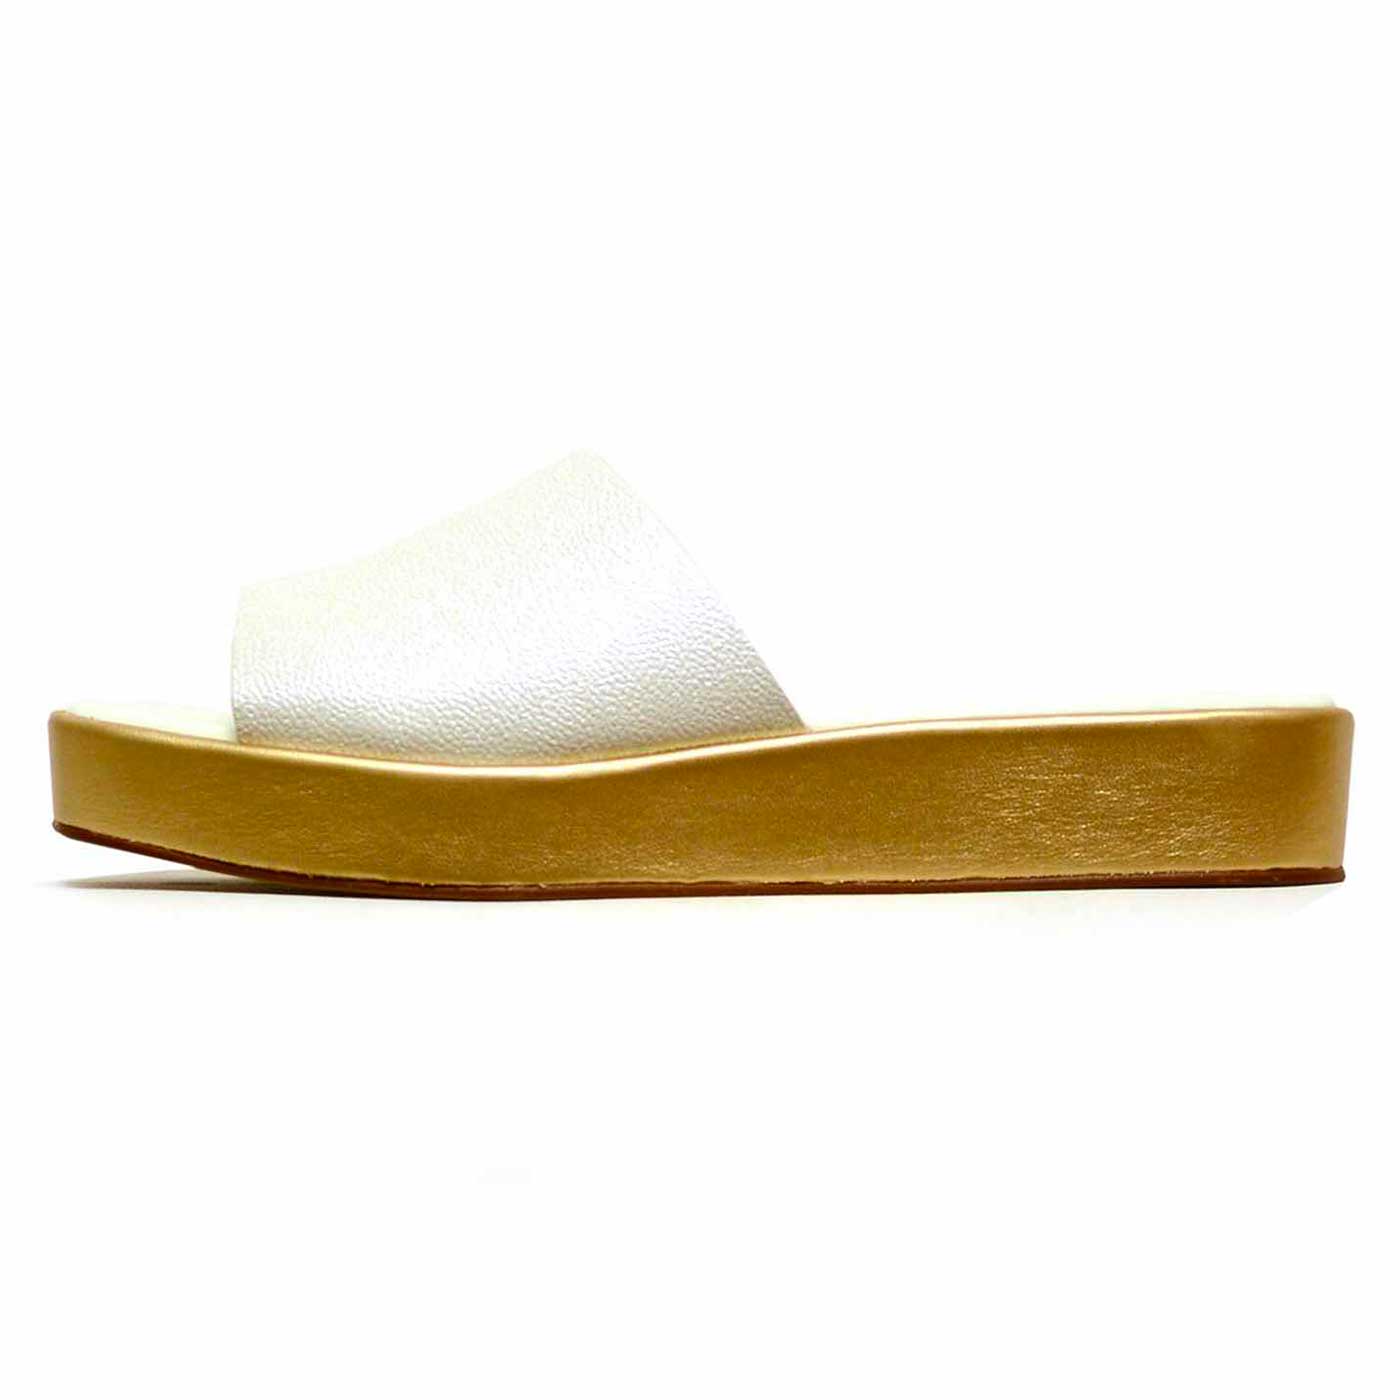 mules cuir lisse blanc or, chaussures femme grande taille